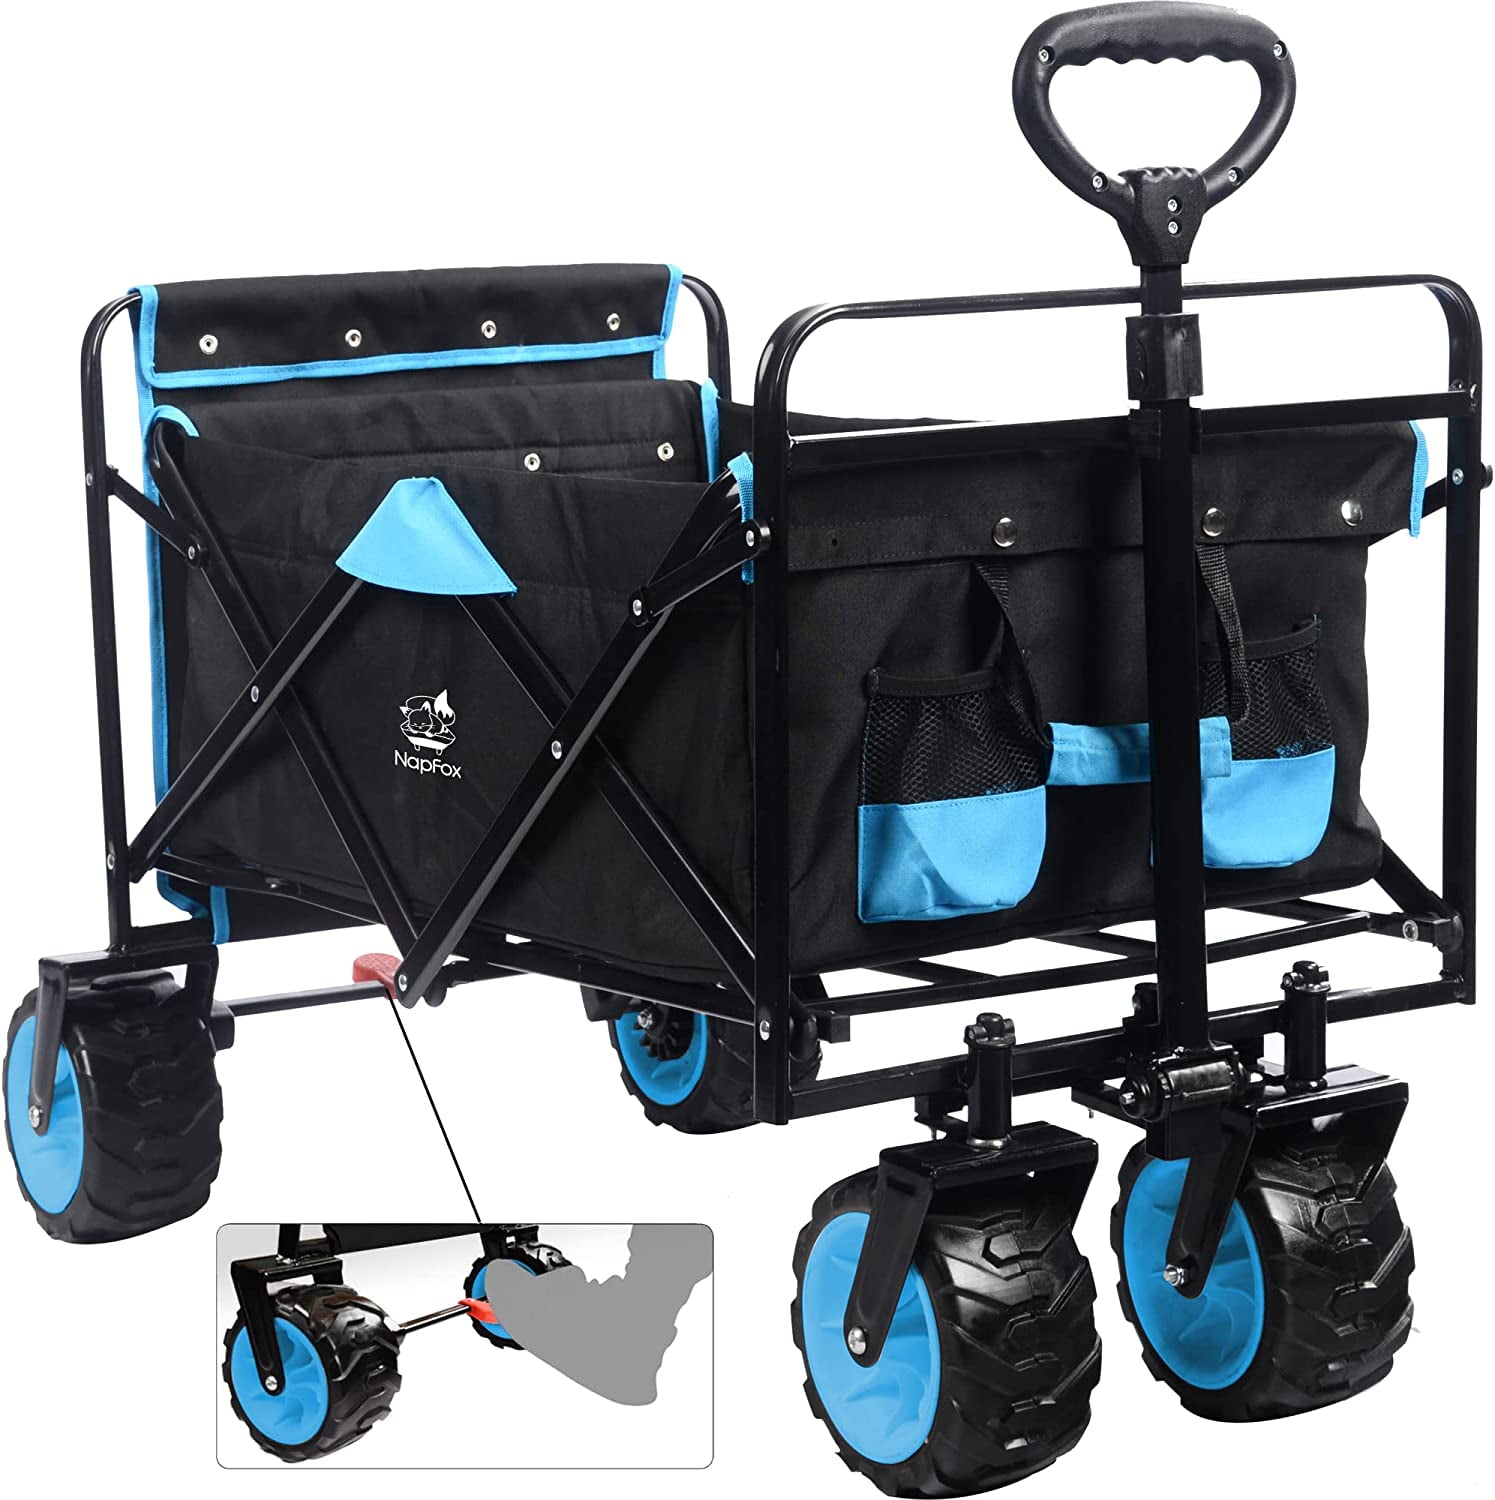 Collapsible Heavy Duty Folding Wagon Cart Utility Wagon with All Terrain Beach Wheels Adjustable Handle Large Capacity Rolling Buggies Outdoor Garden cart for Beach Camping Shopping Sports Portable 